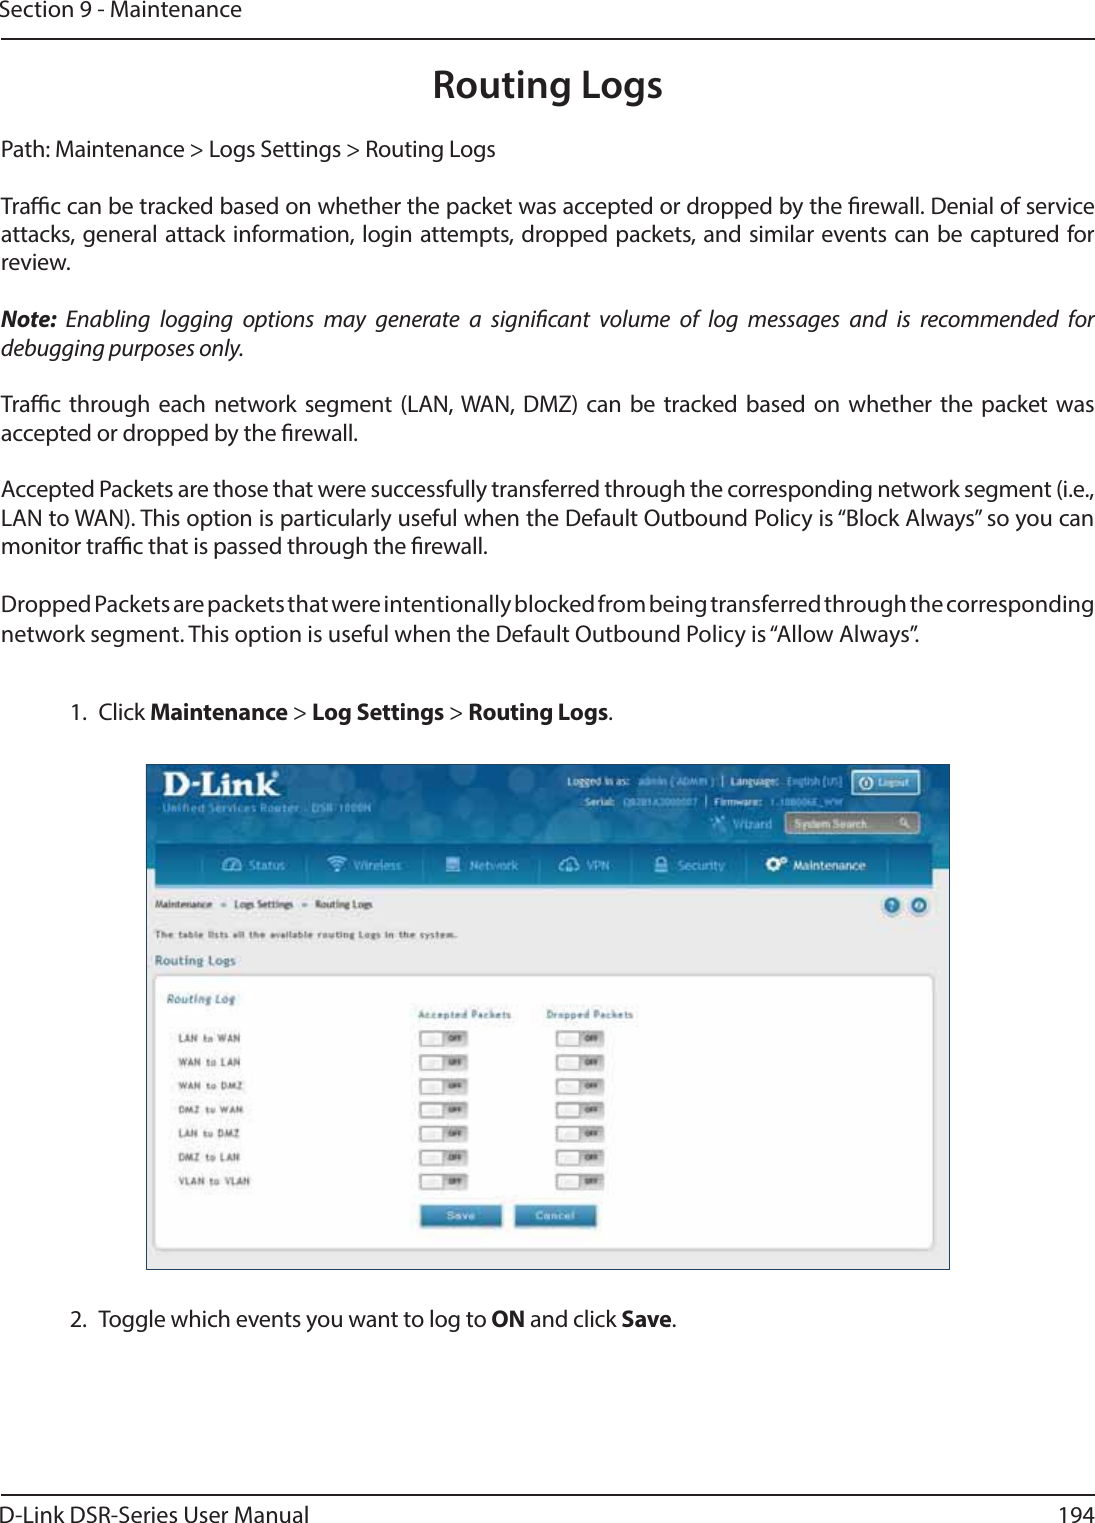 D-Link DSR-Series User Manual 194Section 9 - MaintenanceRouting LogsPath: Maintenance &gt; Logs Settings &gt; Routing LogsTrac can be tracked based on whether the packet was accepted or dropped by the rewall. Denial of service attacks, general attack information, login attempts, dropped packets, and similar events can be captured for review.Note: Enabling logging options may generate a signicant volume of log messages and is recommended for debugging purposes only.Trac through each network segment (LAN, WAN, DMZ) can be tracked based on whether the packet was accepted or dropped by the rewall. Accepted Packets are those that were successfully transferred through the corresponding network segment (i.e., LAN to WAN). This option is particularly useful when the Default Outbound Policy is “Block Always” so you can monitor trac that is passed through the rewall.Dropped Packets are packets that were intentionally blocked from being transferred through the corresponding network segment. This option is useful when the Default Outbound Policy is “Allow Always”.1. Click Maintenance &gt; Log Settings &gt; Routing Logs.2.  Toggle which events you want to log to ON and click Save.